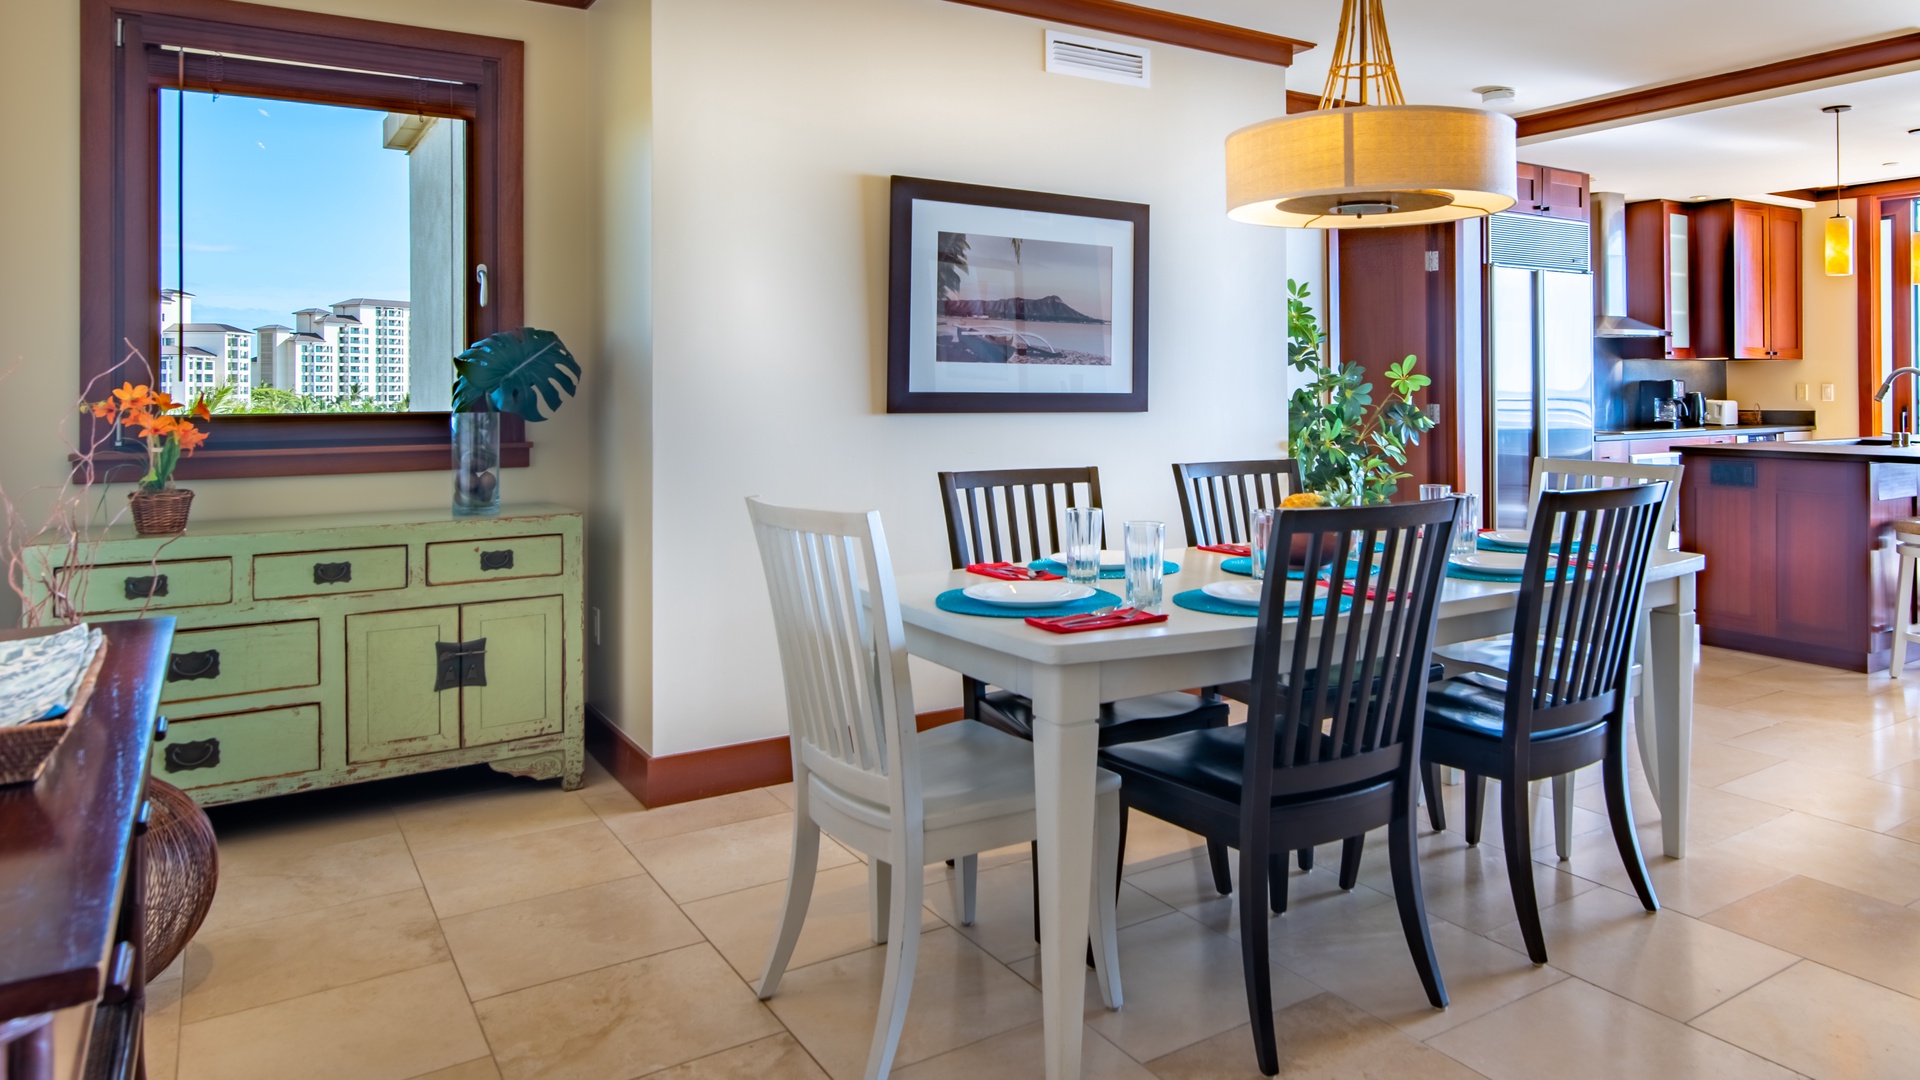 Kapolei Vacation Rentals, Ko Olina Beach Villas B609 - Bright and cheerful dining in your abode.